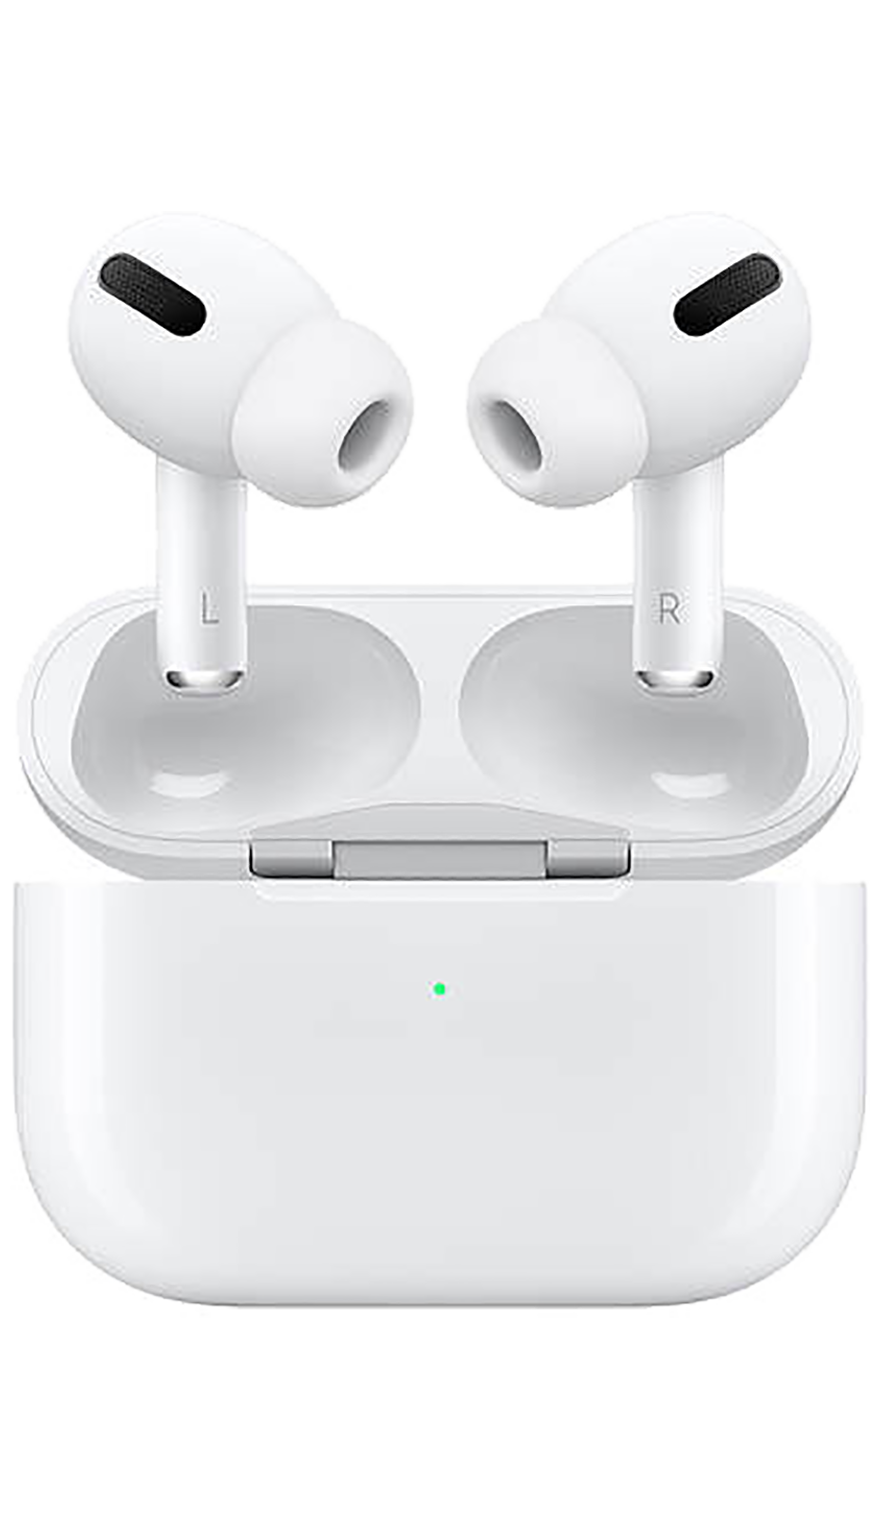 Airpods Max Pros - Apple AirPods Max Review: Pros And Cons / Which of